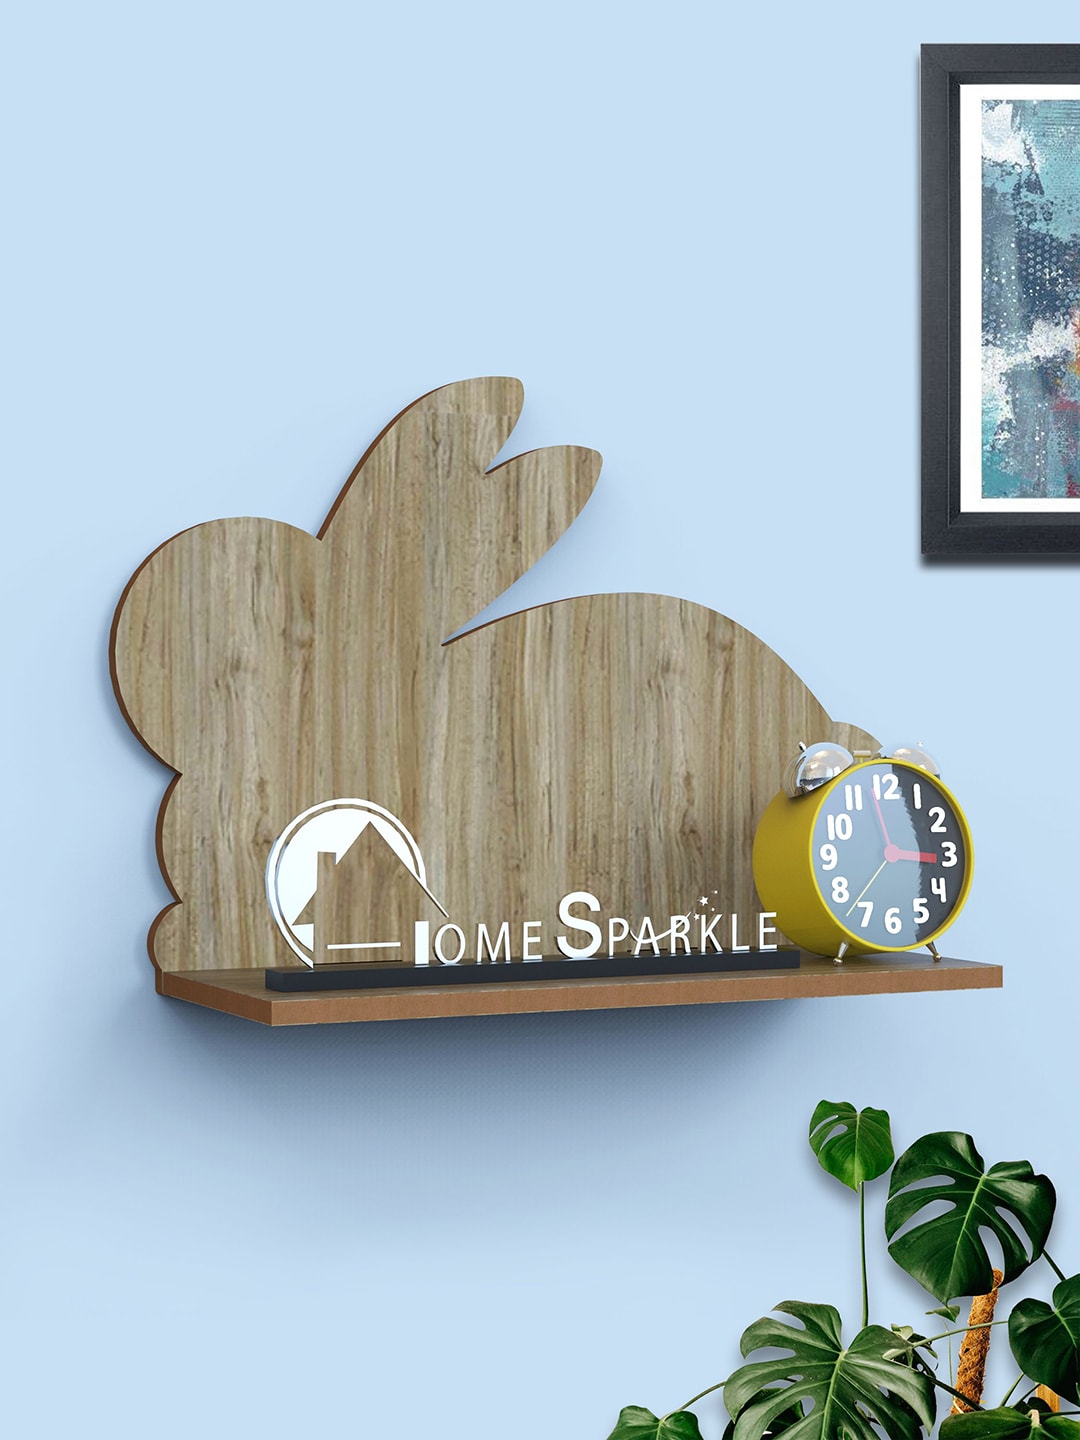 Home Sparkle Rabbit Shape Wall Mounted Wall Shelf Price in India